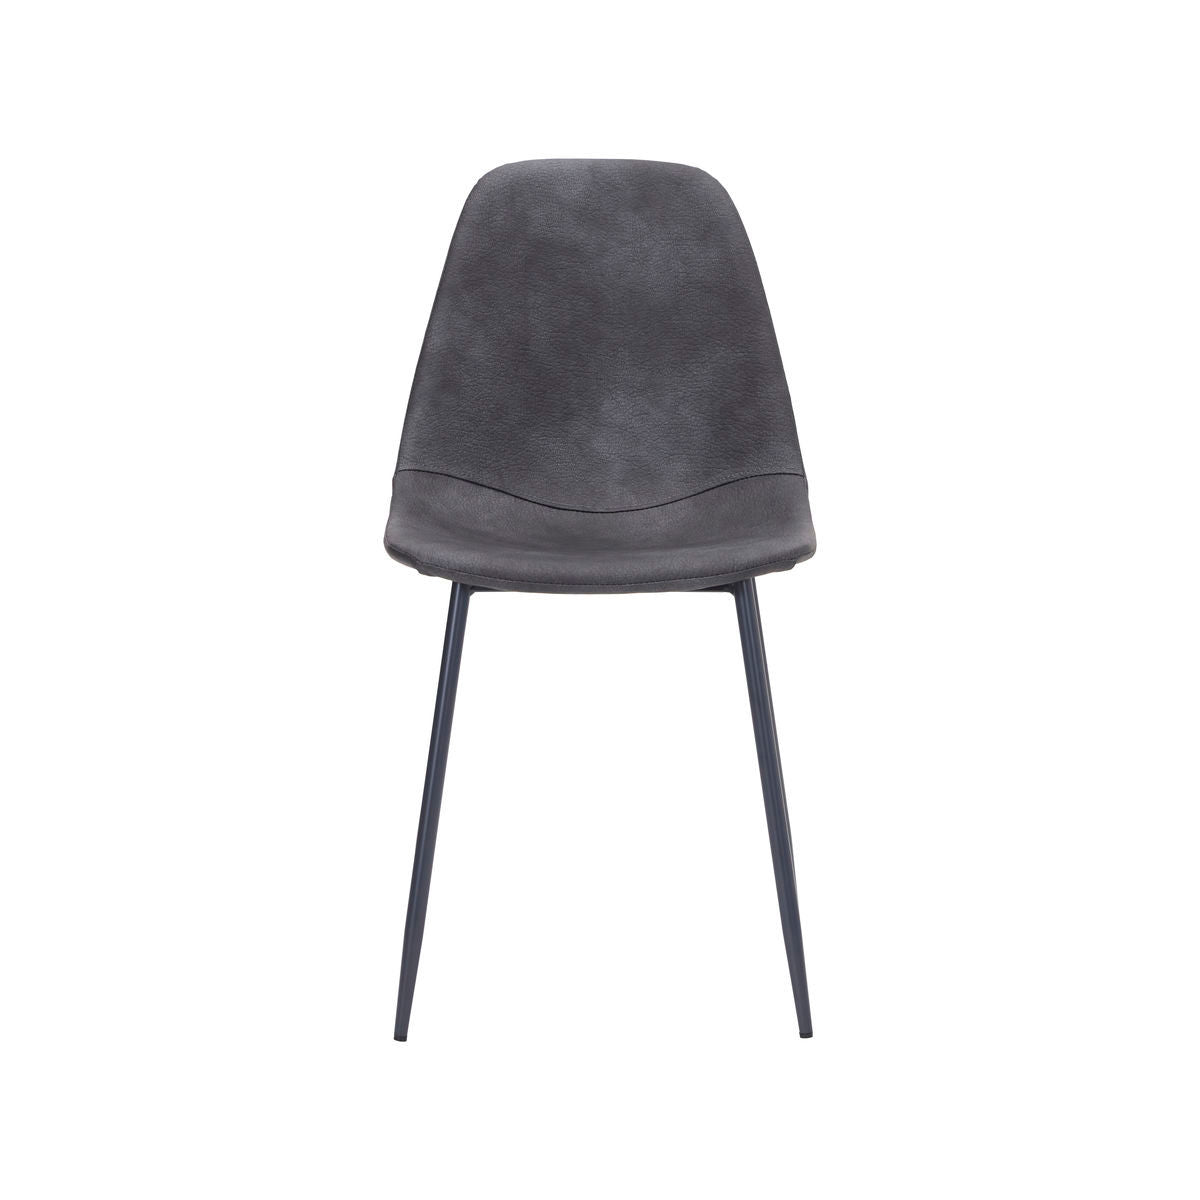 House Doctor Chair, HDFound, Antique grey